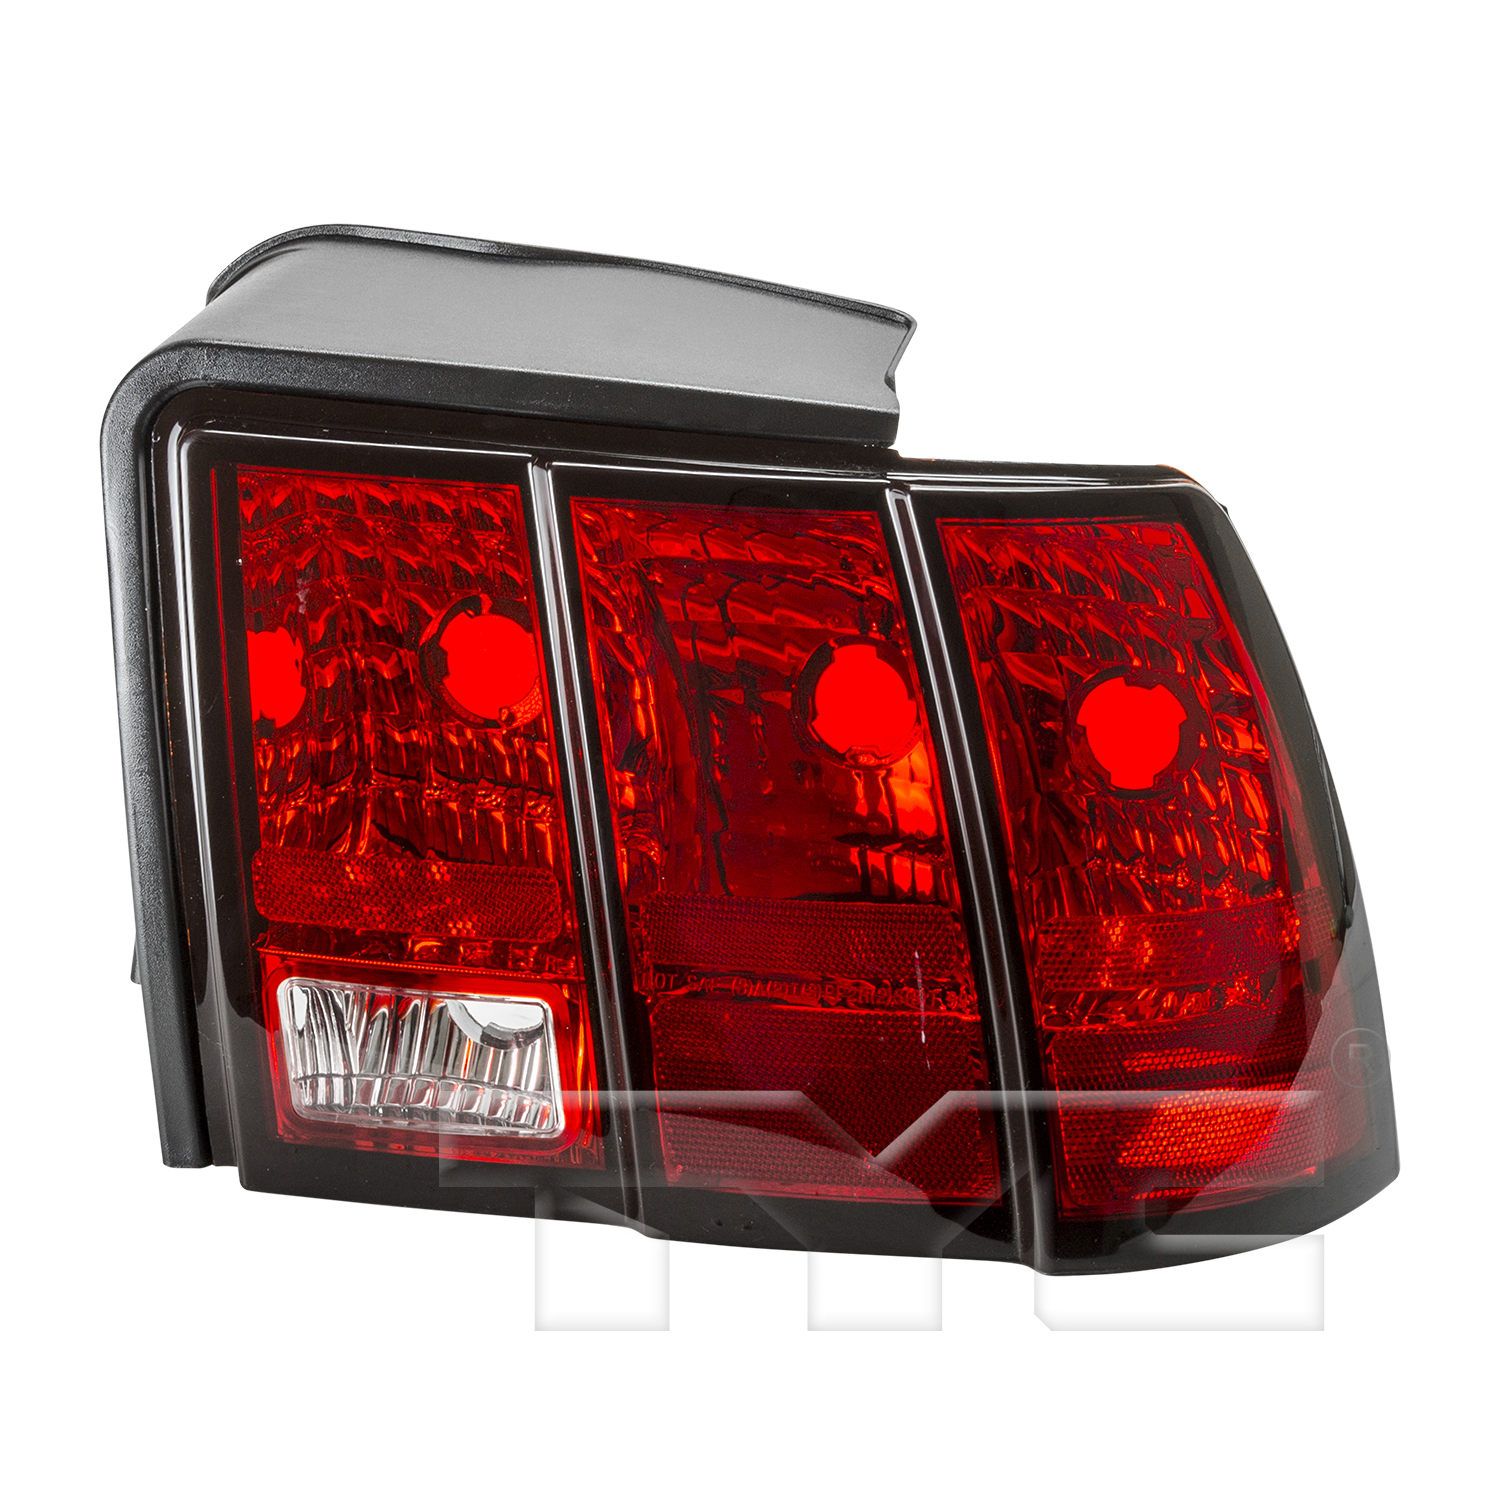 Aftermarket TAILLIGHTS for FORD - MUSTANG, MUSTANG,99-04,RT Taillamp lens/housing